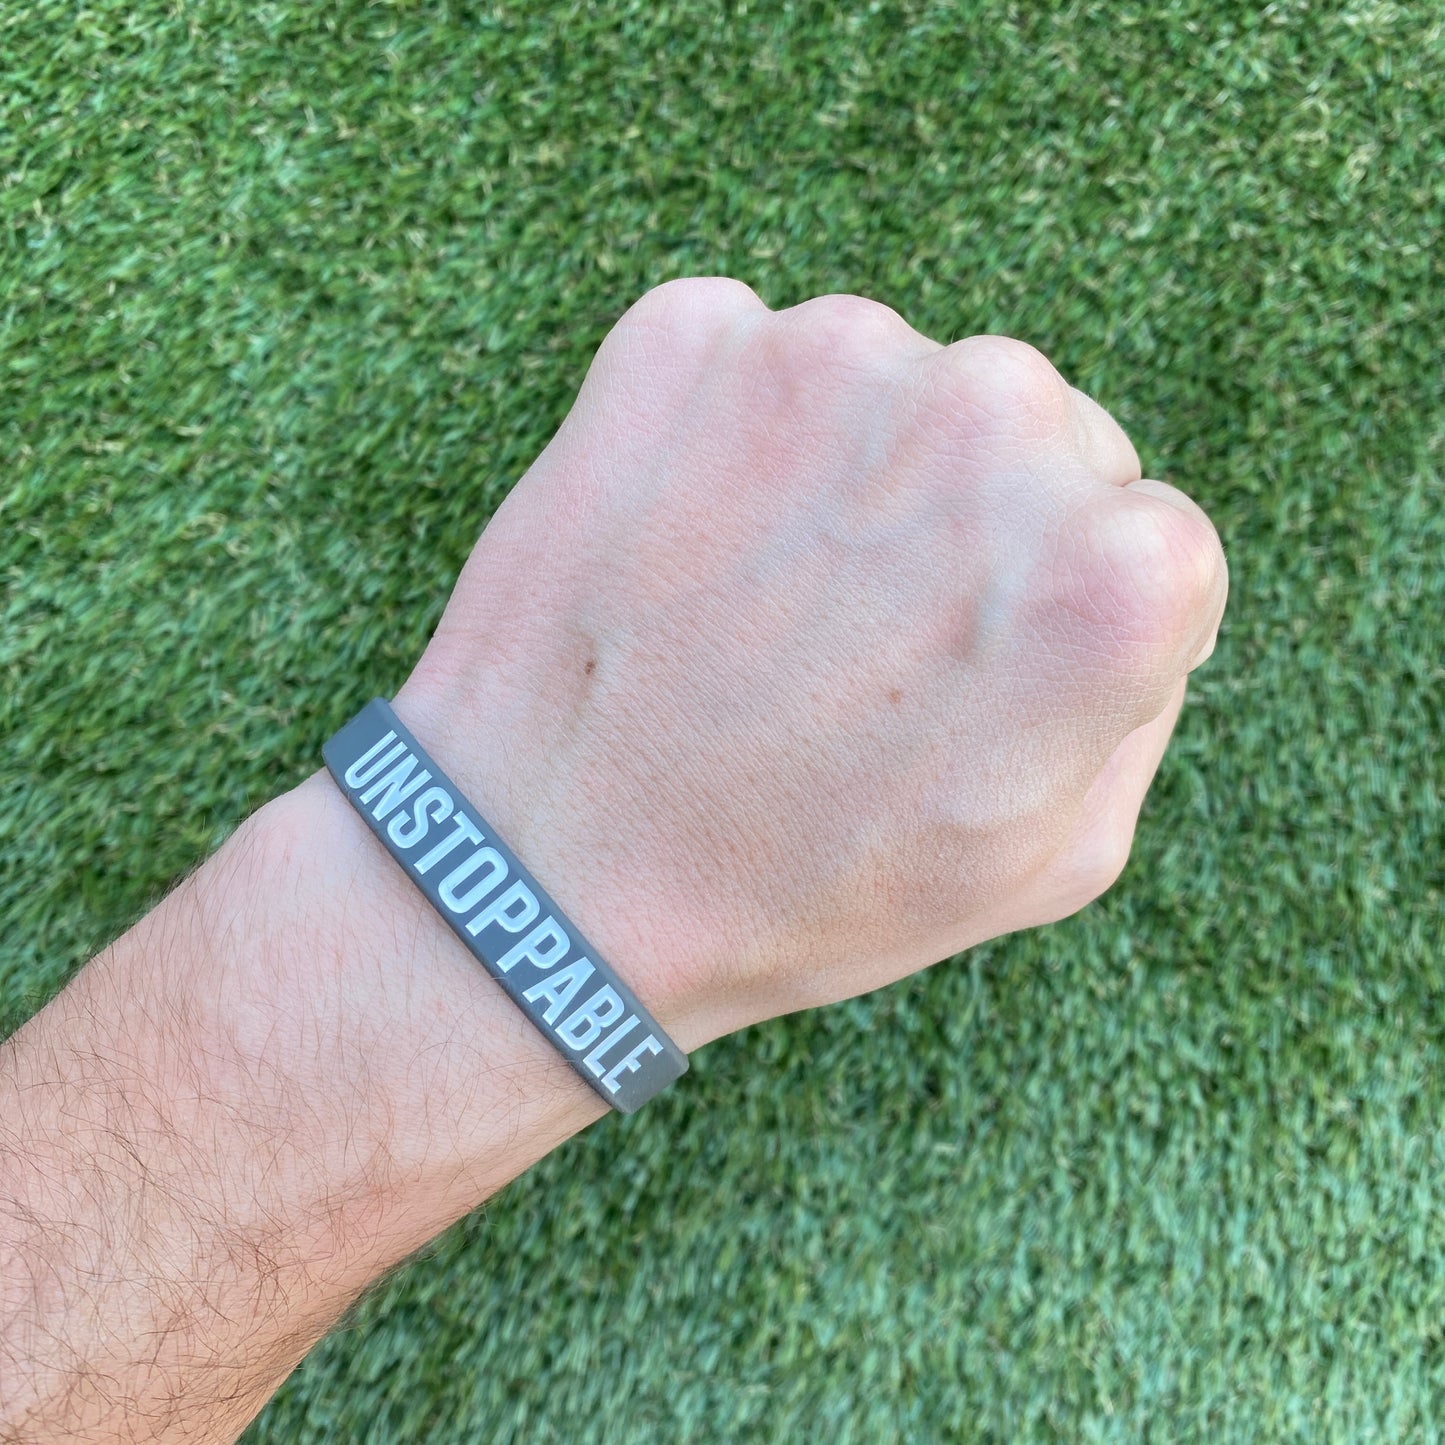 UNSTOPPABLE Wristband